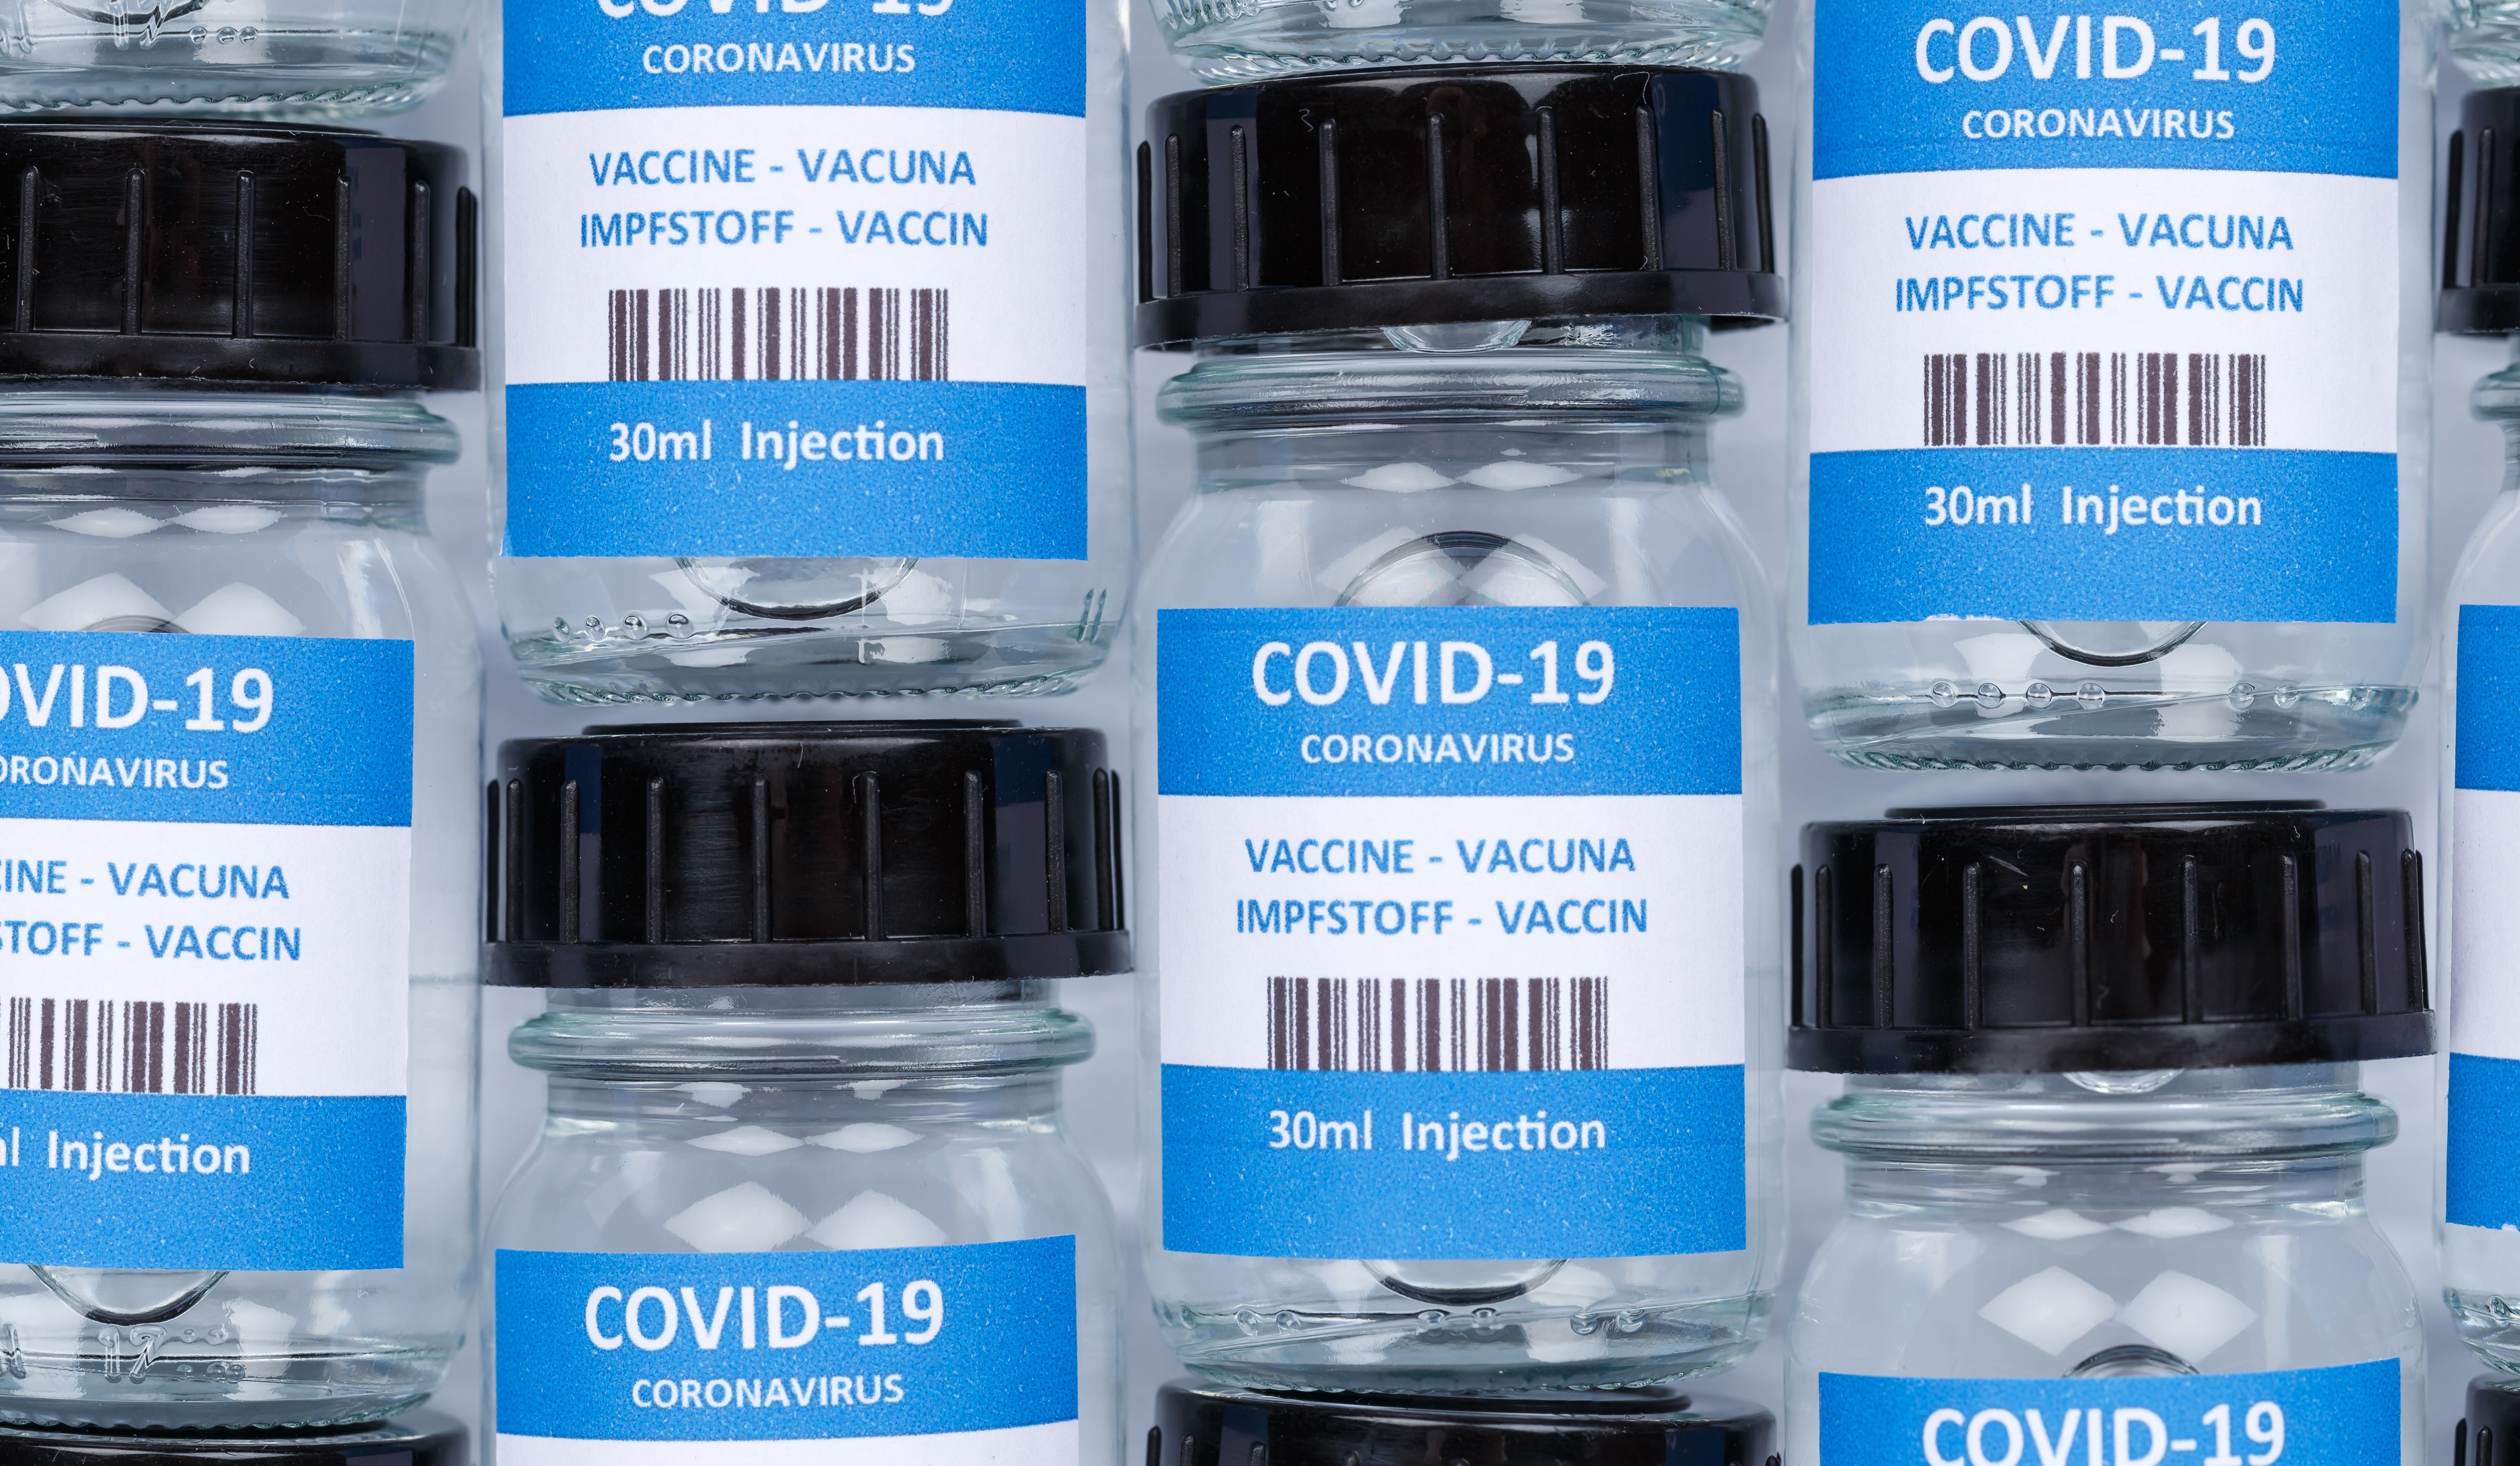 Novavax begins rolling review of COVID-19 vaccine candidate